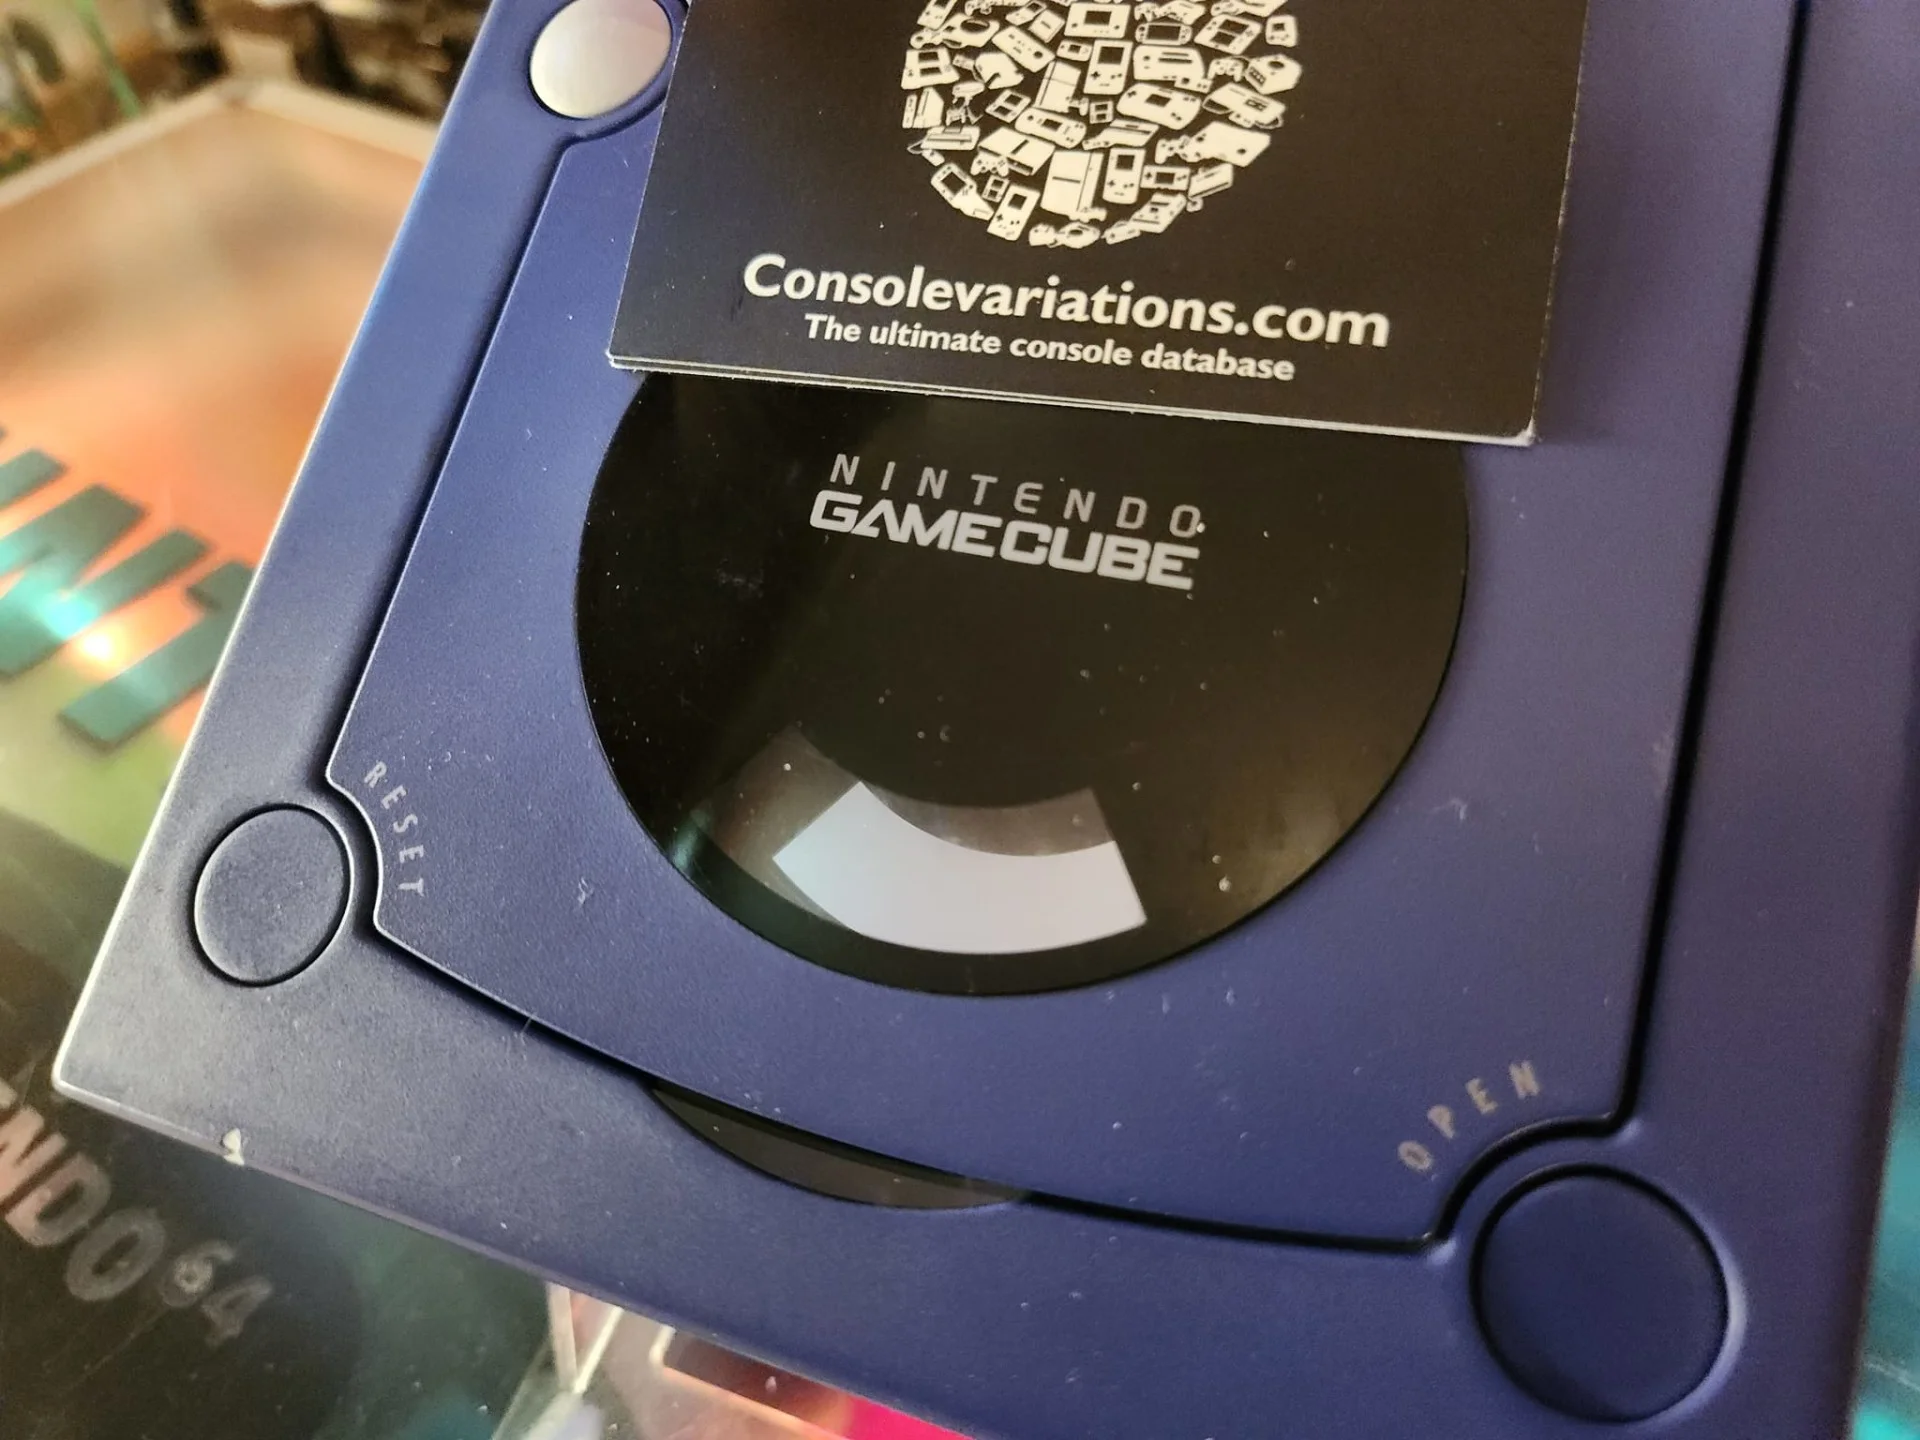 The Spaceworld GameCube Has been found, and here is a comparison!